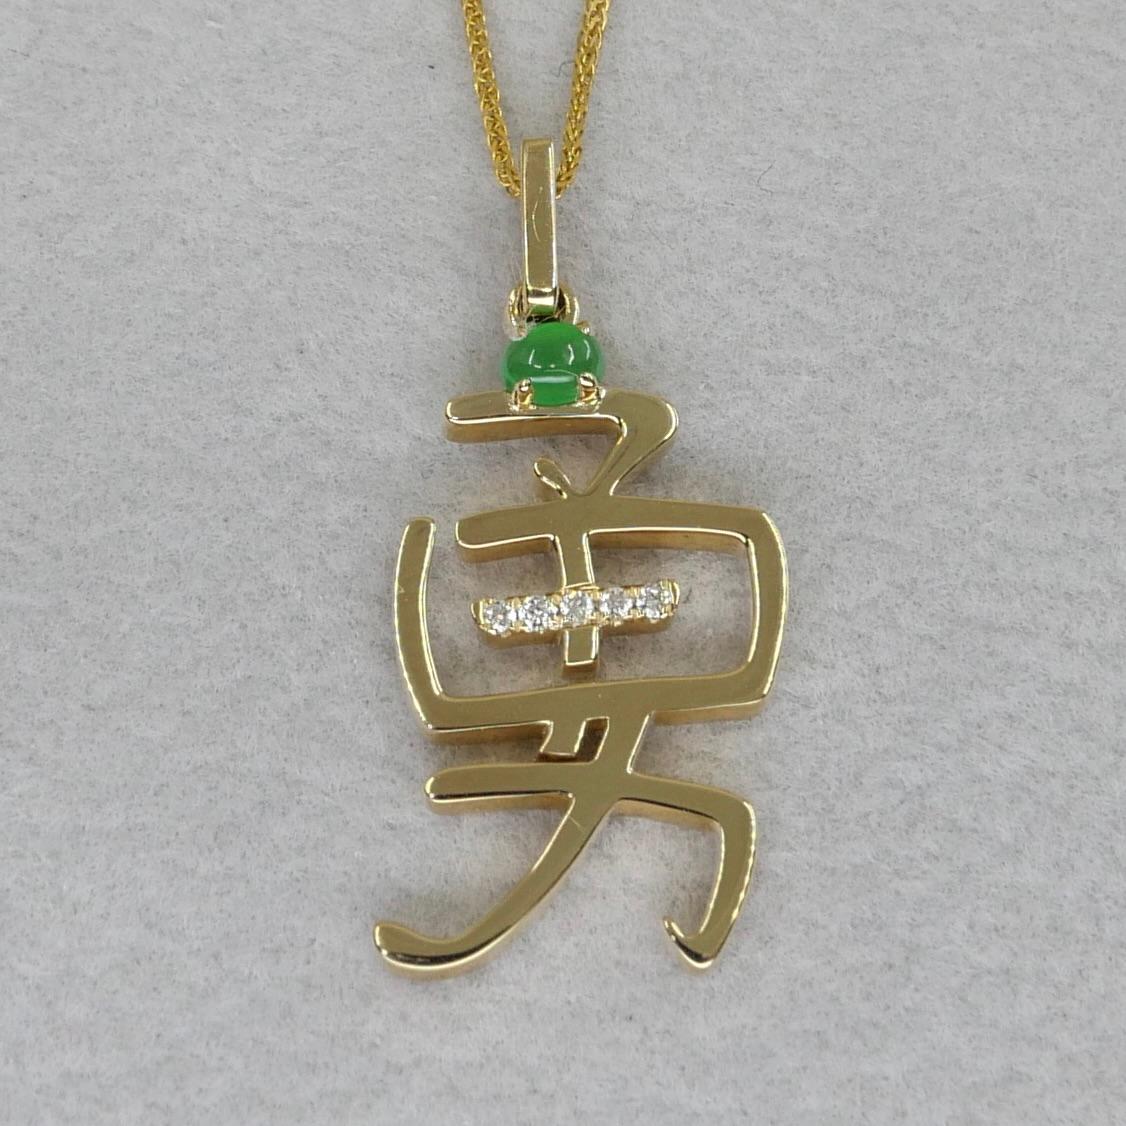  Certified Jade & Diamond Courage Pendant, 18k Yellow Gold. Imperial Green. For Sale 2